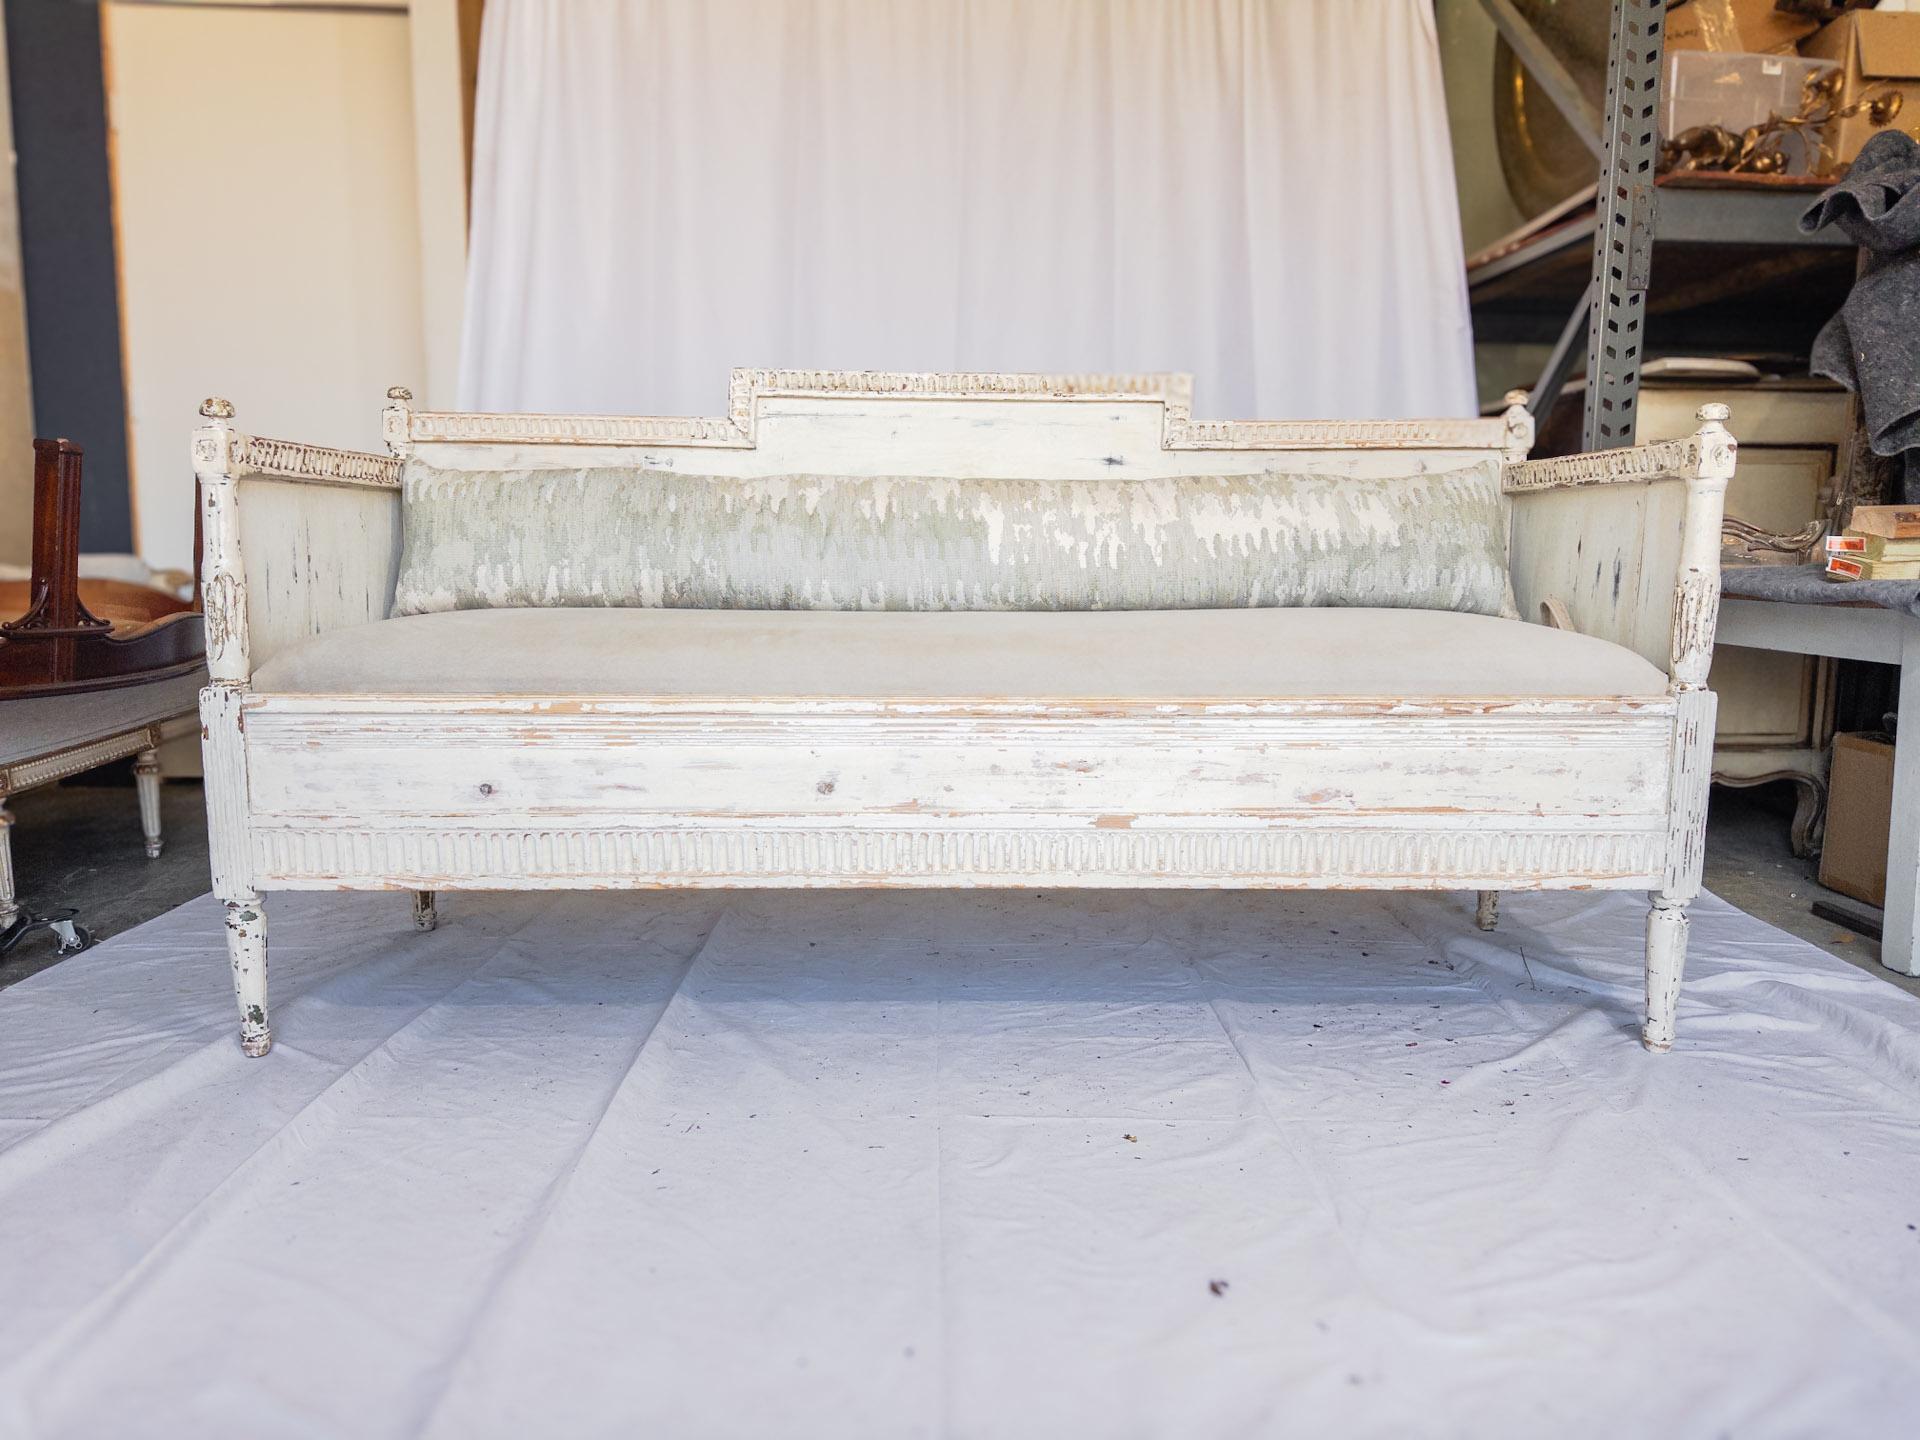 The 19th Century Swedish Gustavian Style Painted Sofa Bench exemplifies the elegance and sophistication of Gustavian furniture design. Carved with meticulous detail, this piece showcases the craftsmanship and artistry of the era. Its graceful lines